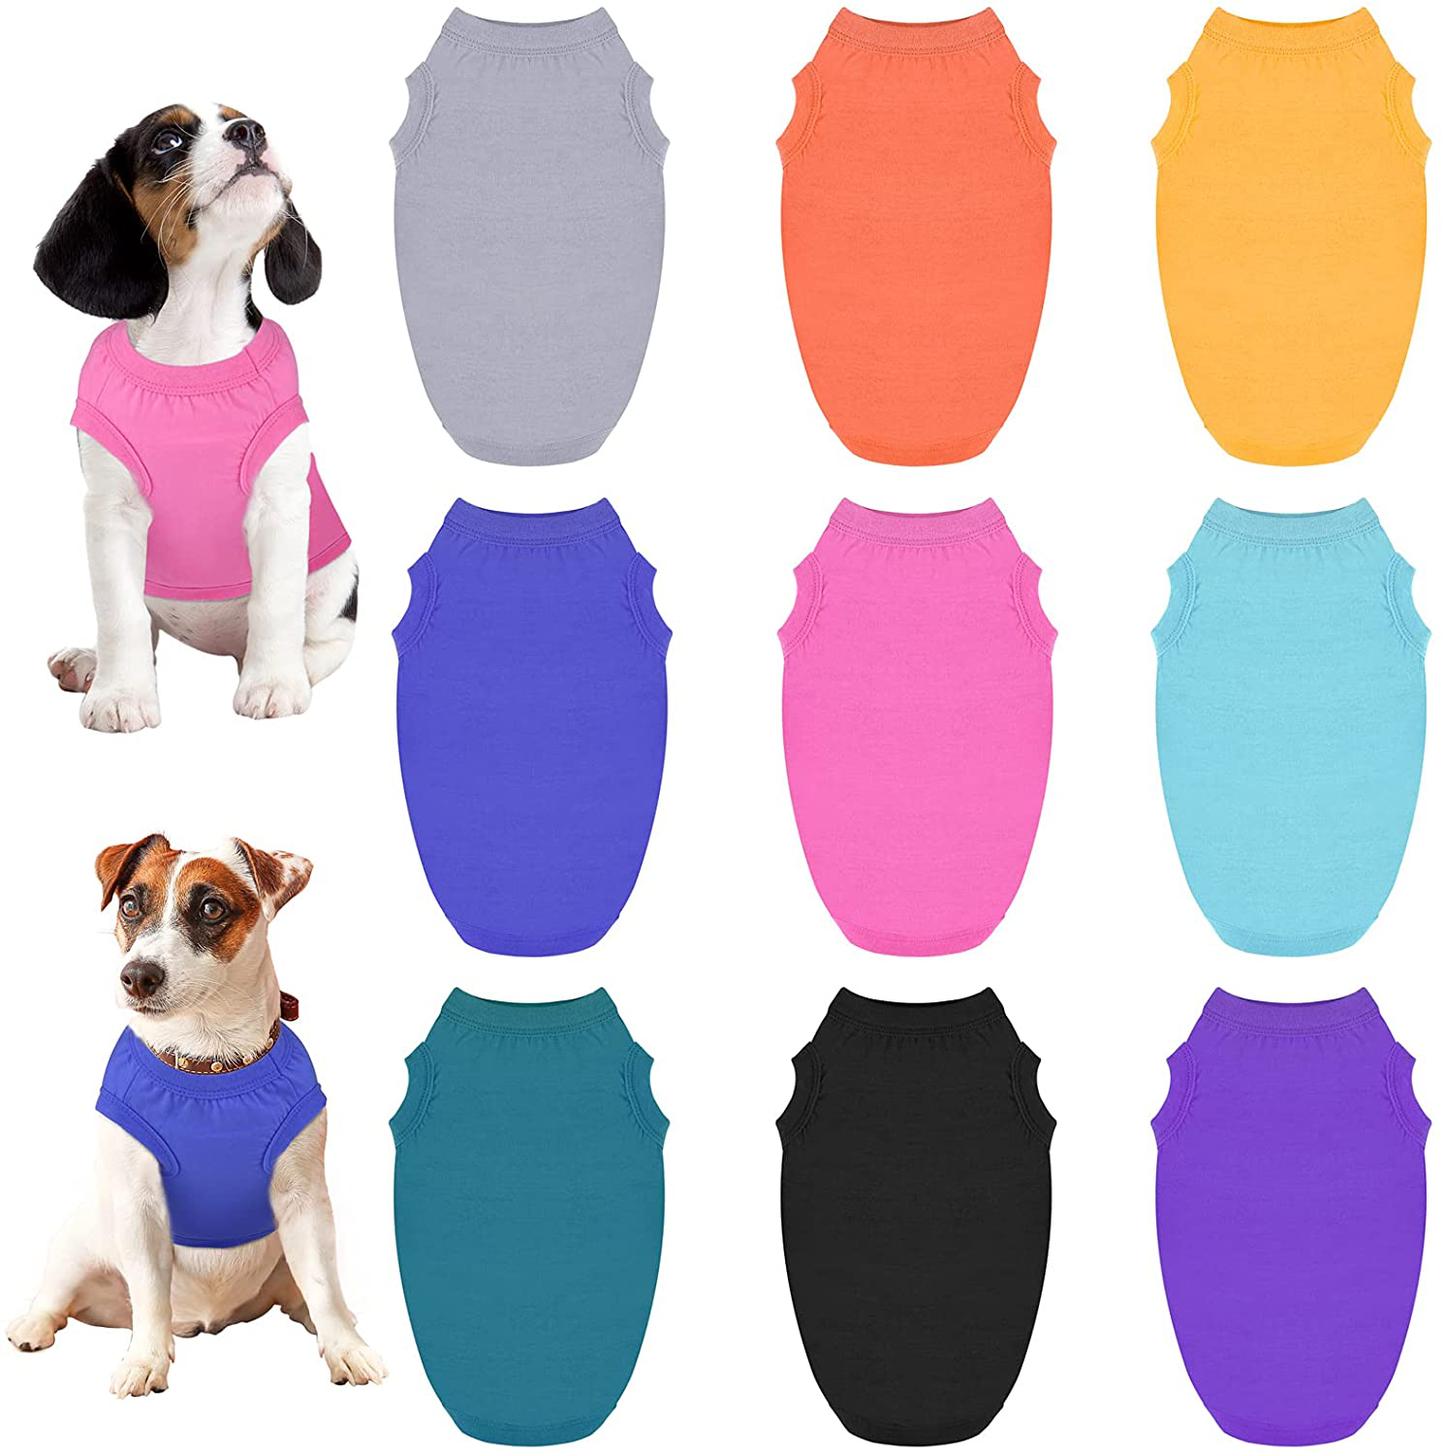 URATOT 9 Pack Dog T-Shirt Dog Plain Shirts Pet Blank Clothes Cotton Puppy Clothes Mixed Colors Pet Apparel Dog Cat Pet Clothes for Spring Summer, Large Animals & Pet Supplies > Pet Supplies > Dog Supplies > Dog Apparel URATOT Black, Hot Red, Purple, Grey, Mixed Colors Small 